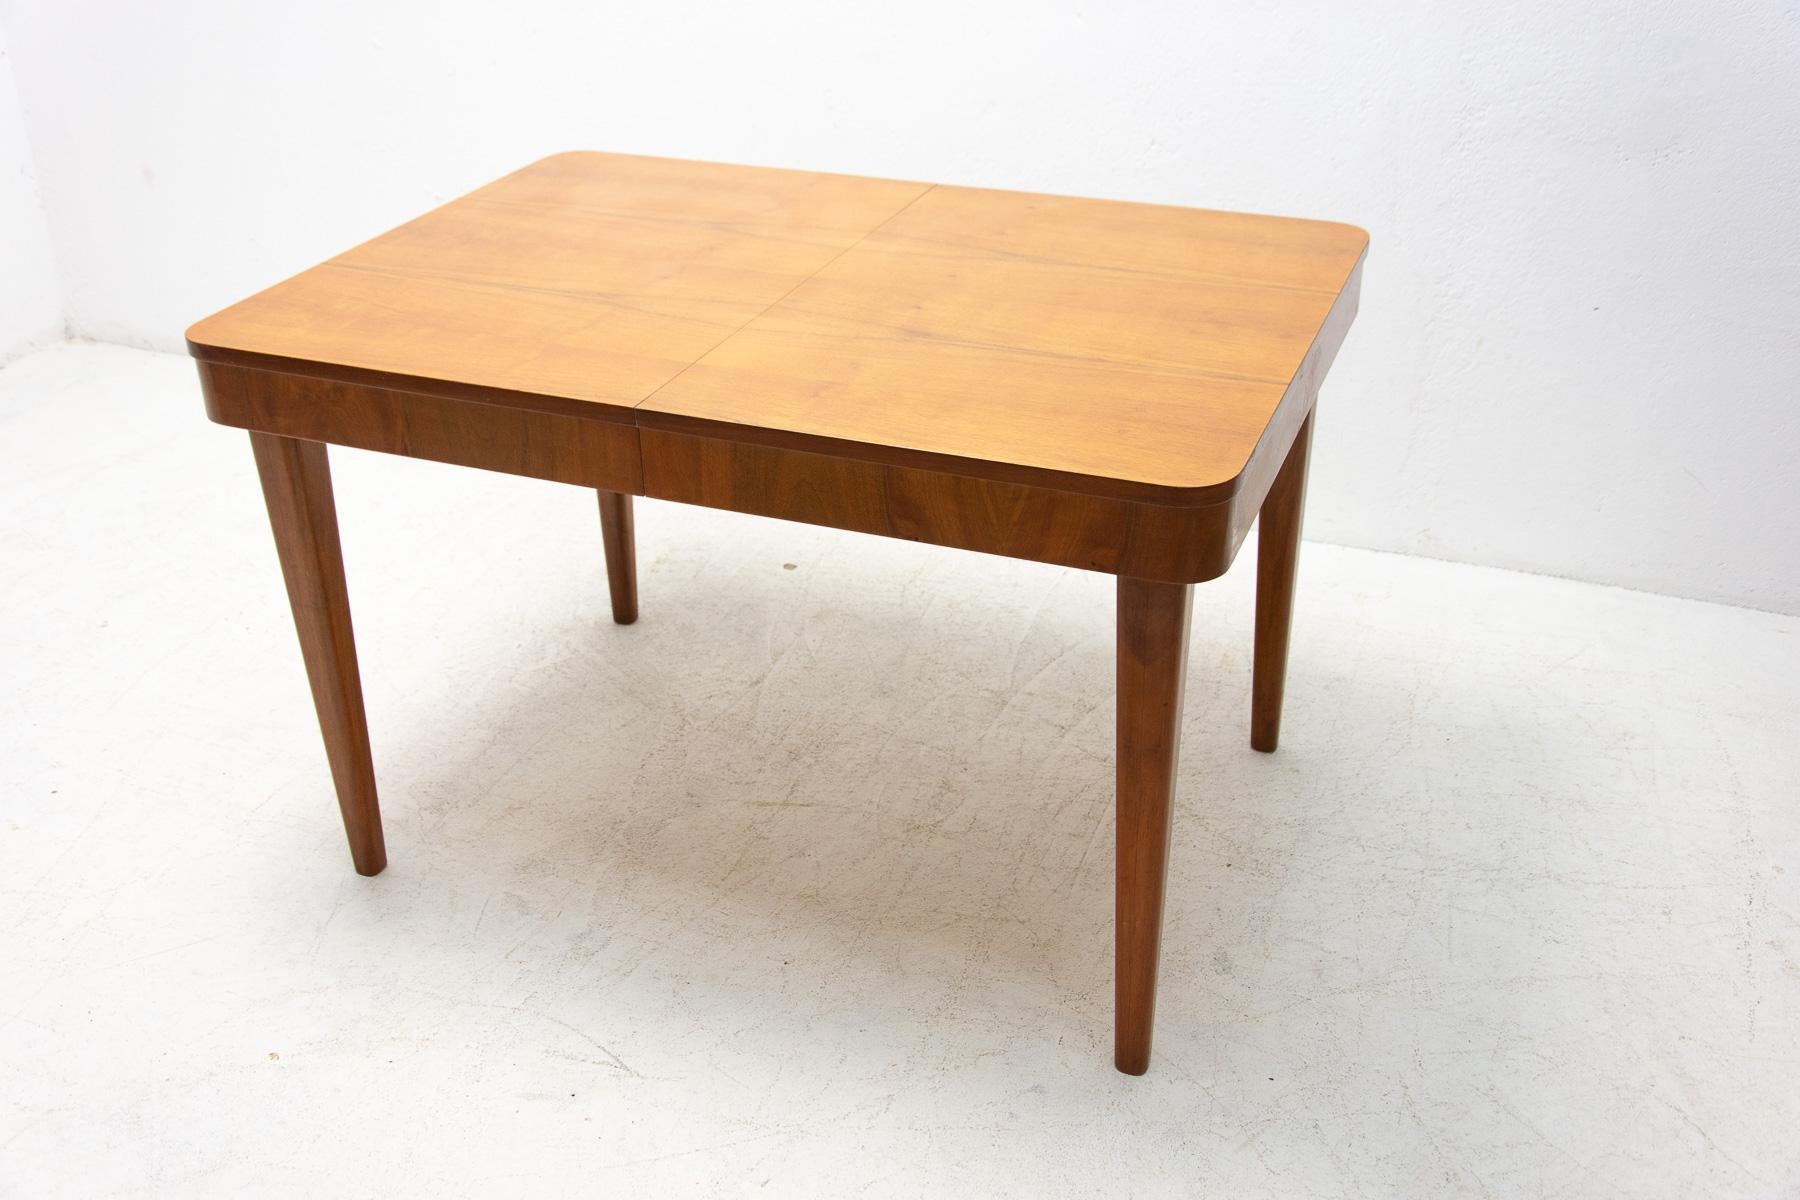 This adjustable dining table was designed and made in the 1950s in the former Czechoslovakia. It was designed by Jindrich Halabala for ÚP Závody Brno. The material is a combination of solid wood and walnut veneer. The table is in good Vintage